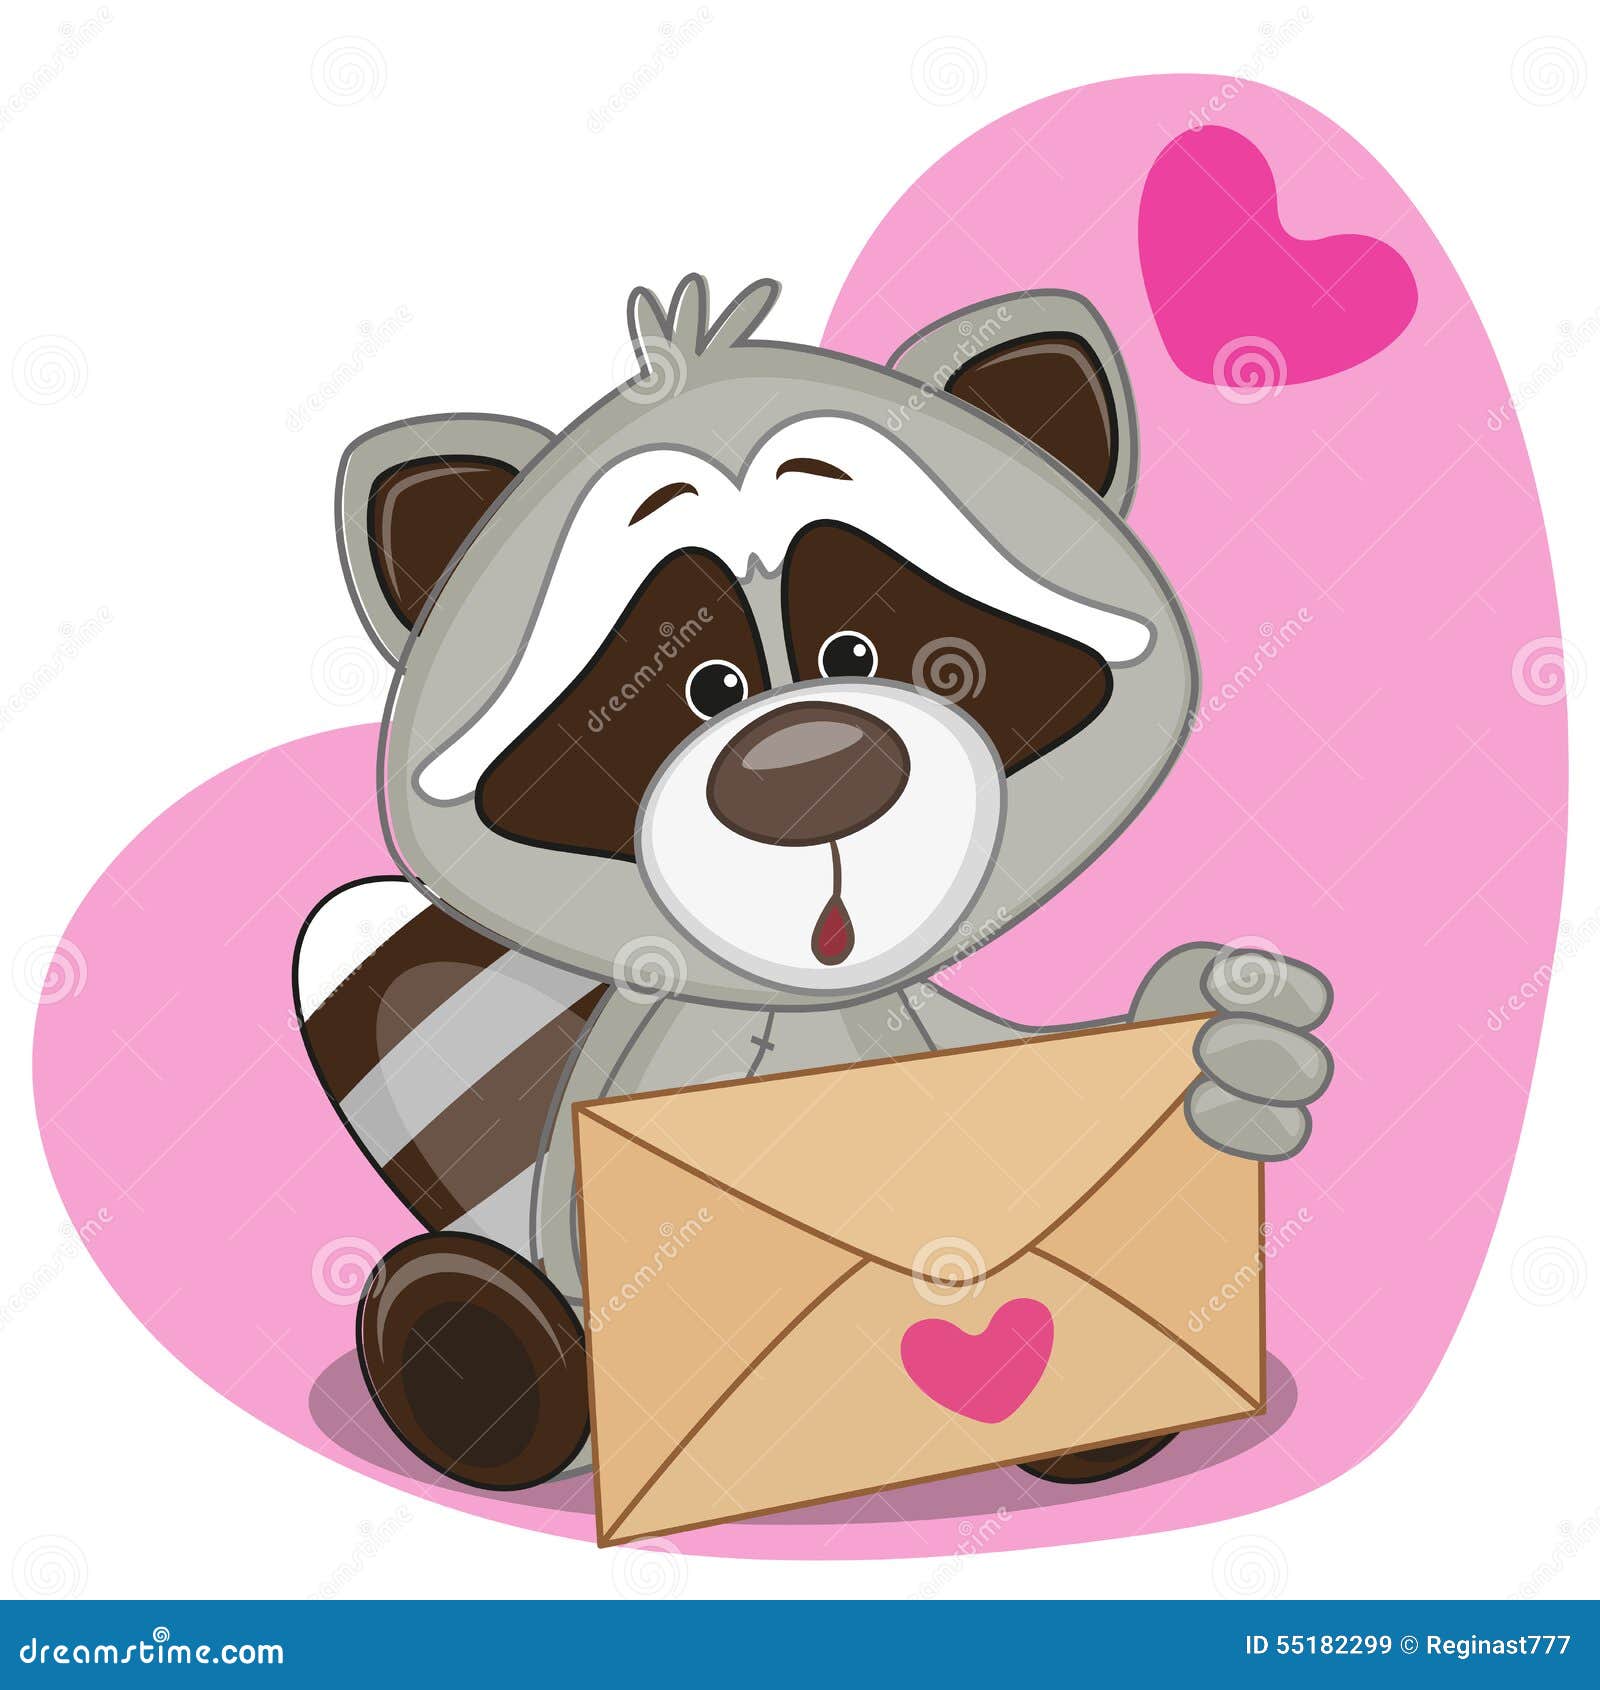 raccon with envelope